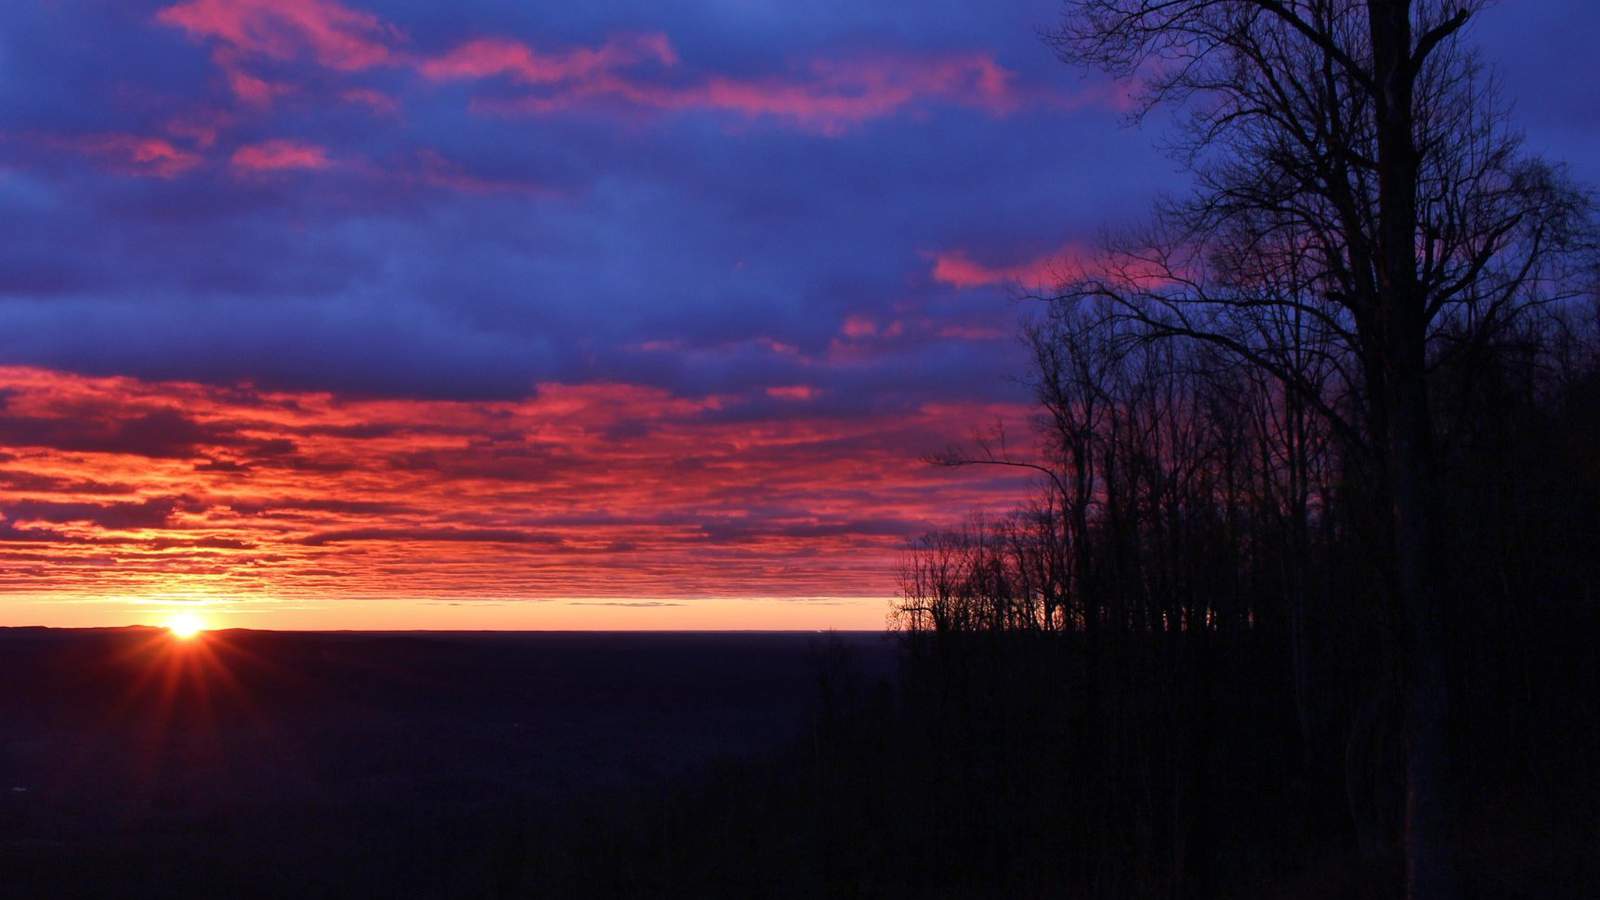 PHOTO GALLERY: New Year’s Day 2020’s fiery sunrise